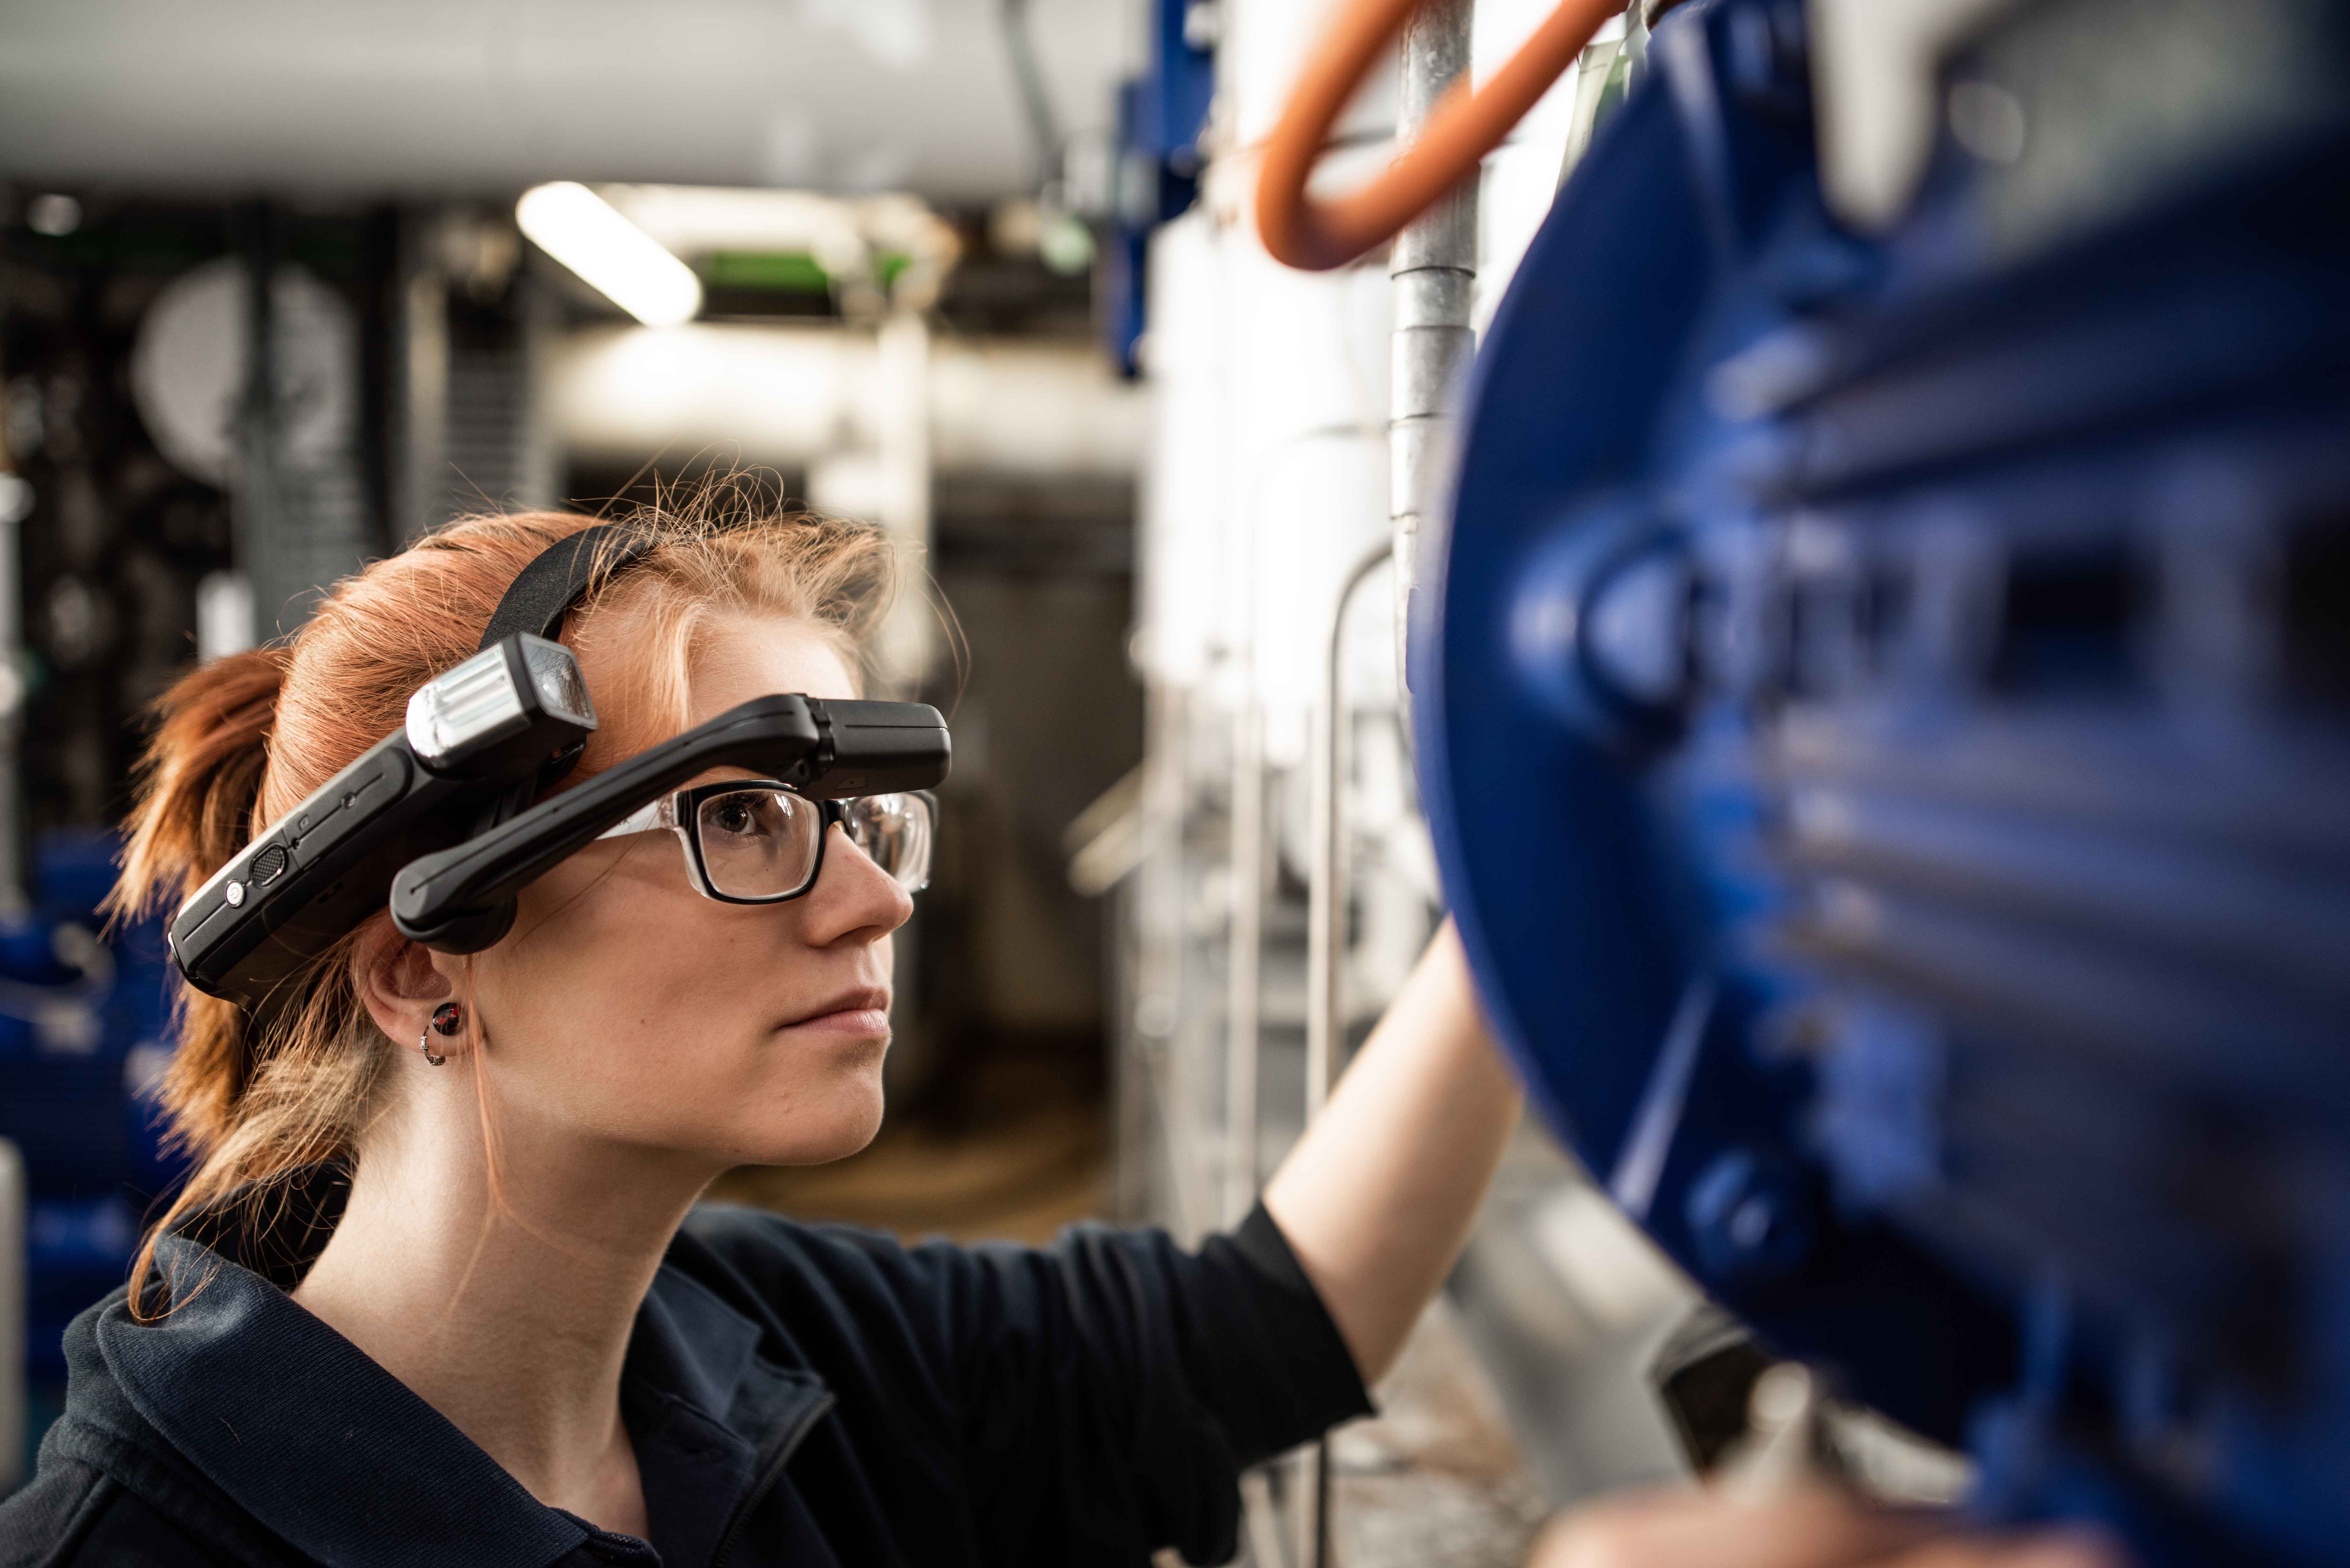 At this year’s ACHEMA, KSB Service GmbH is, for the first time, presenting its new service concept based on augmented reality. (KSB SE & Co. KGaA, Frankenthal)